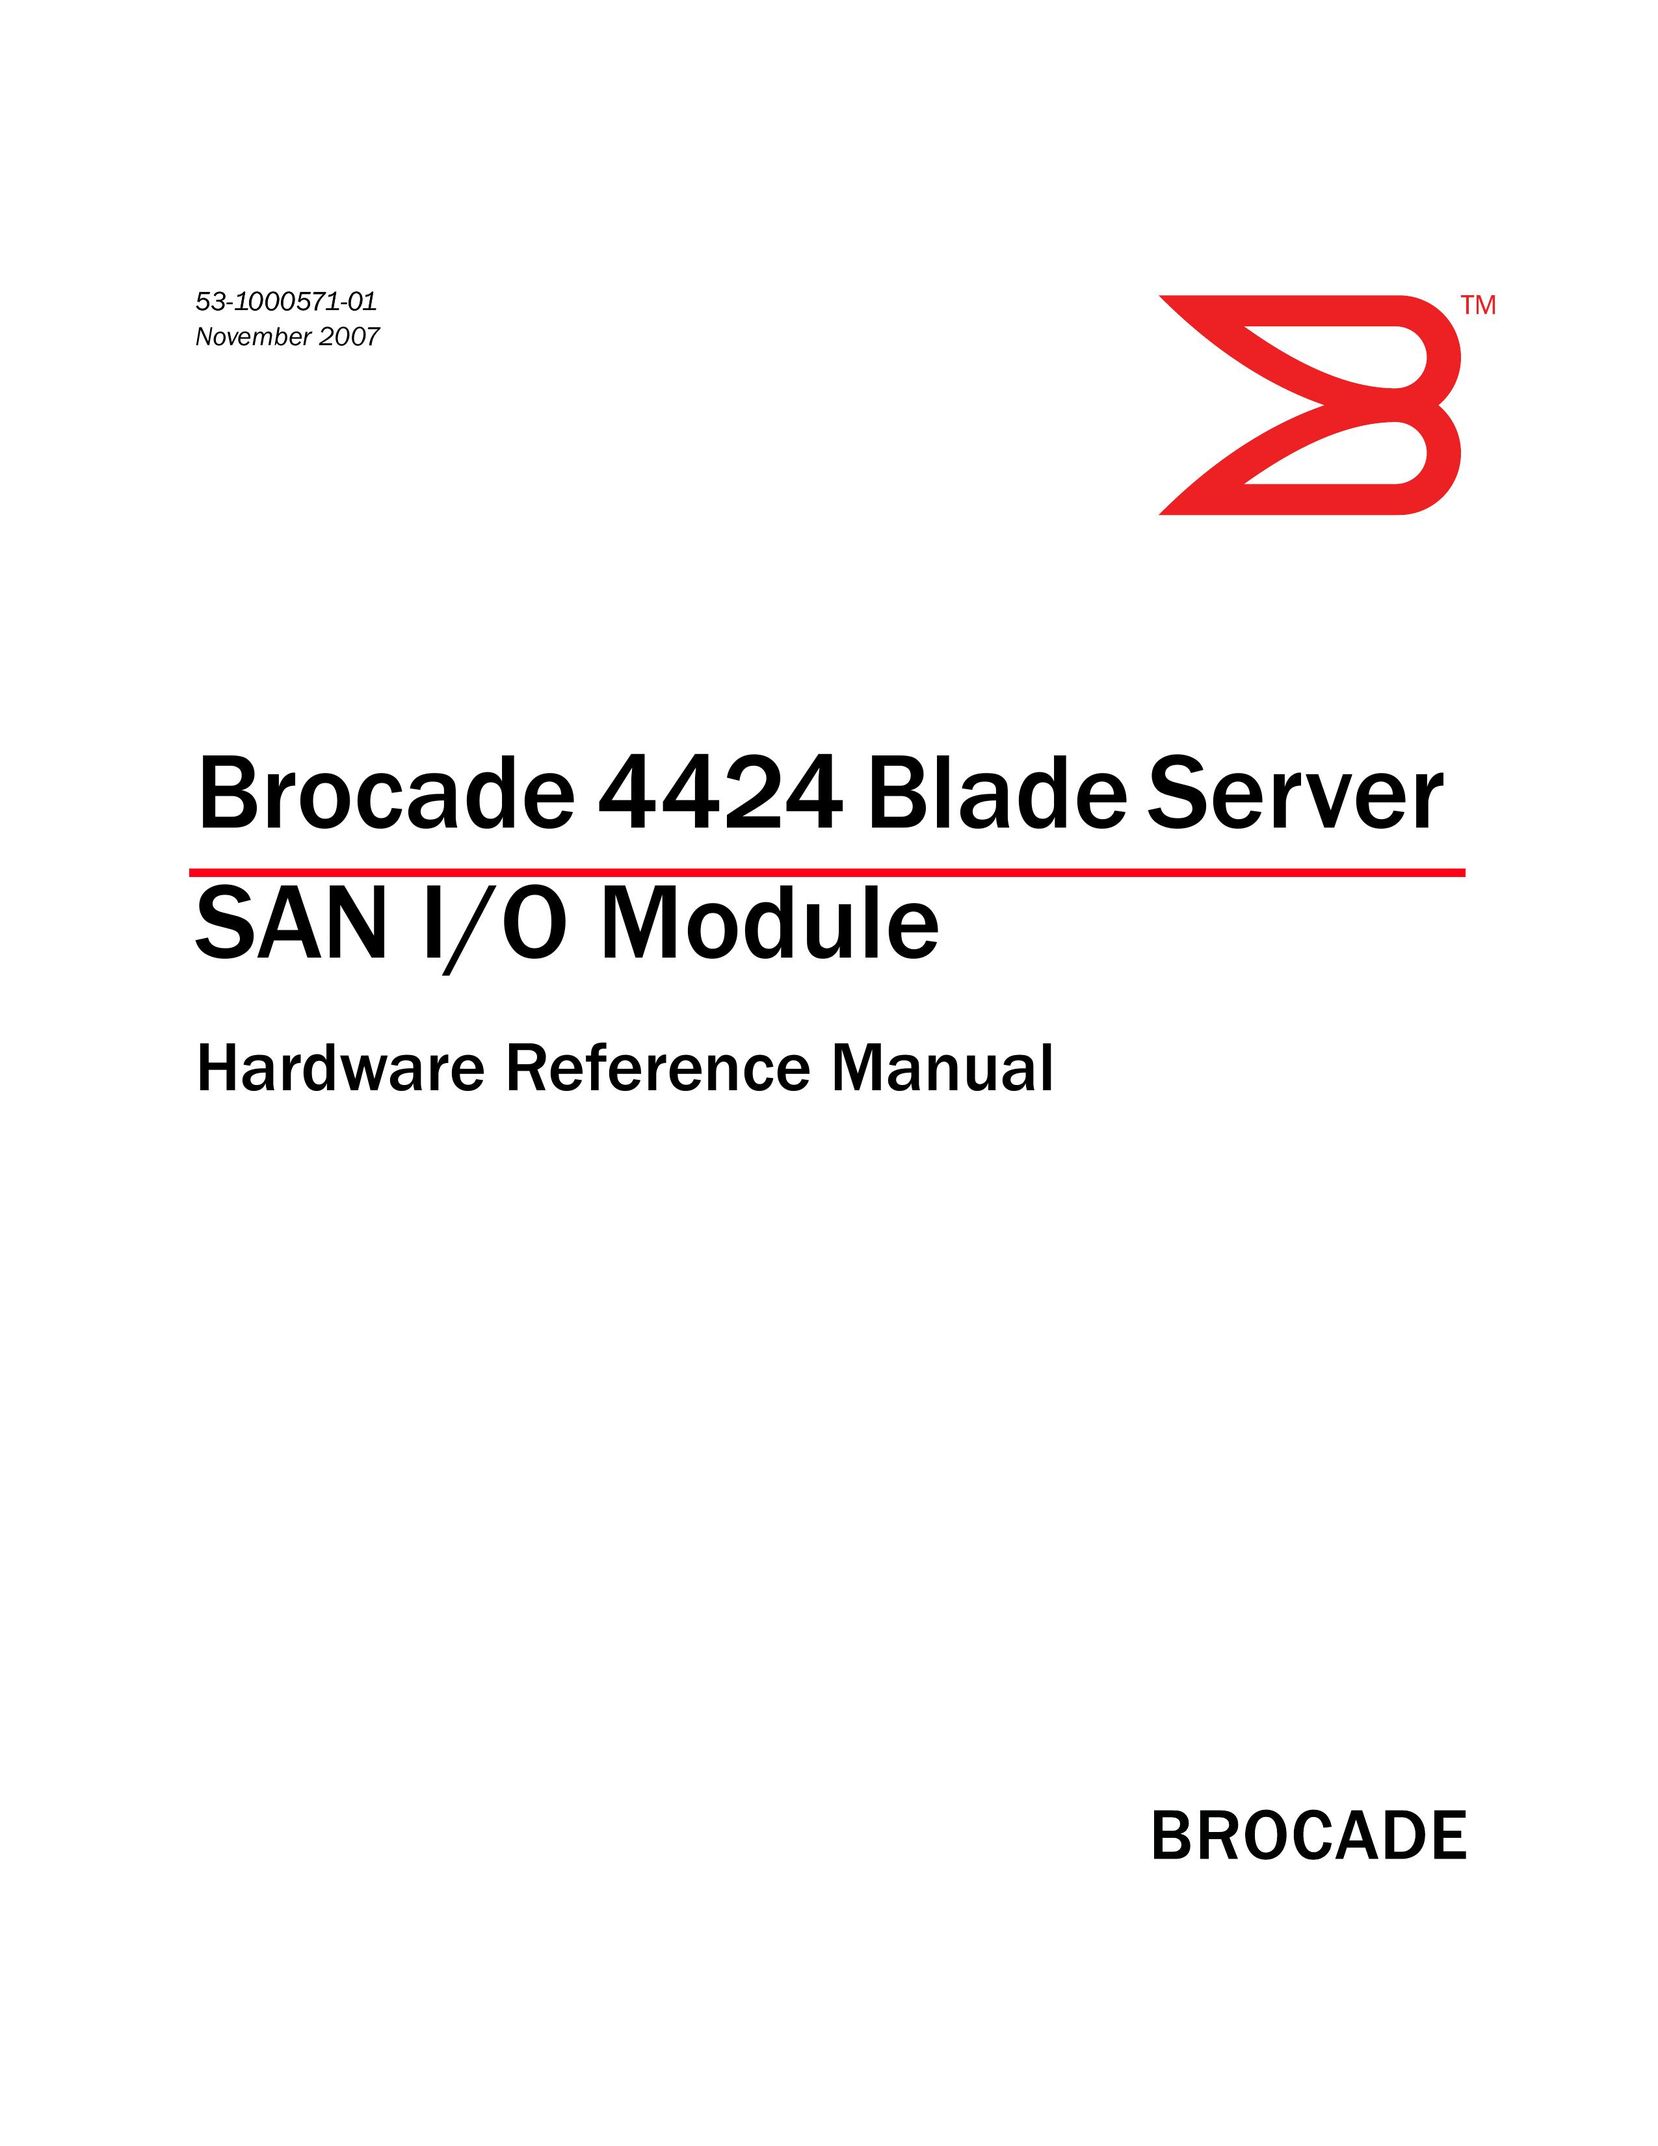 Brocade Communications Systems 53-1000571-01 Server User Manual